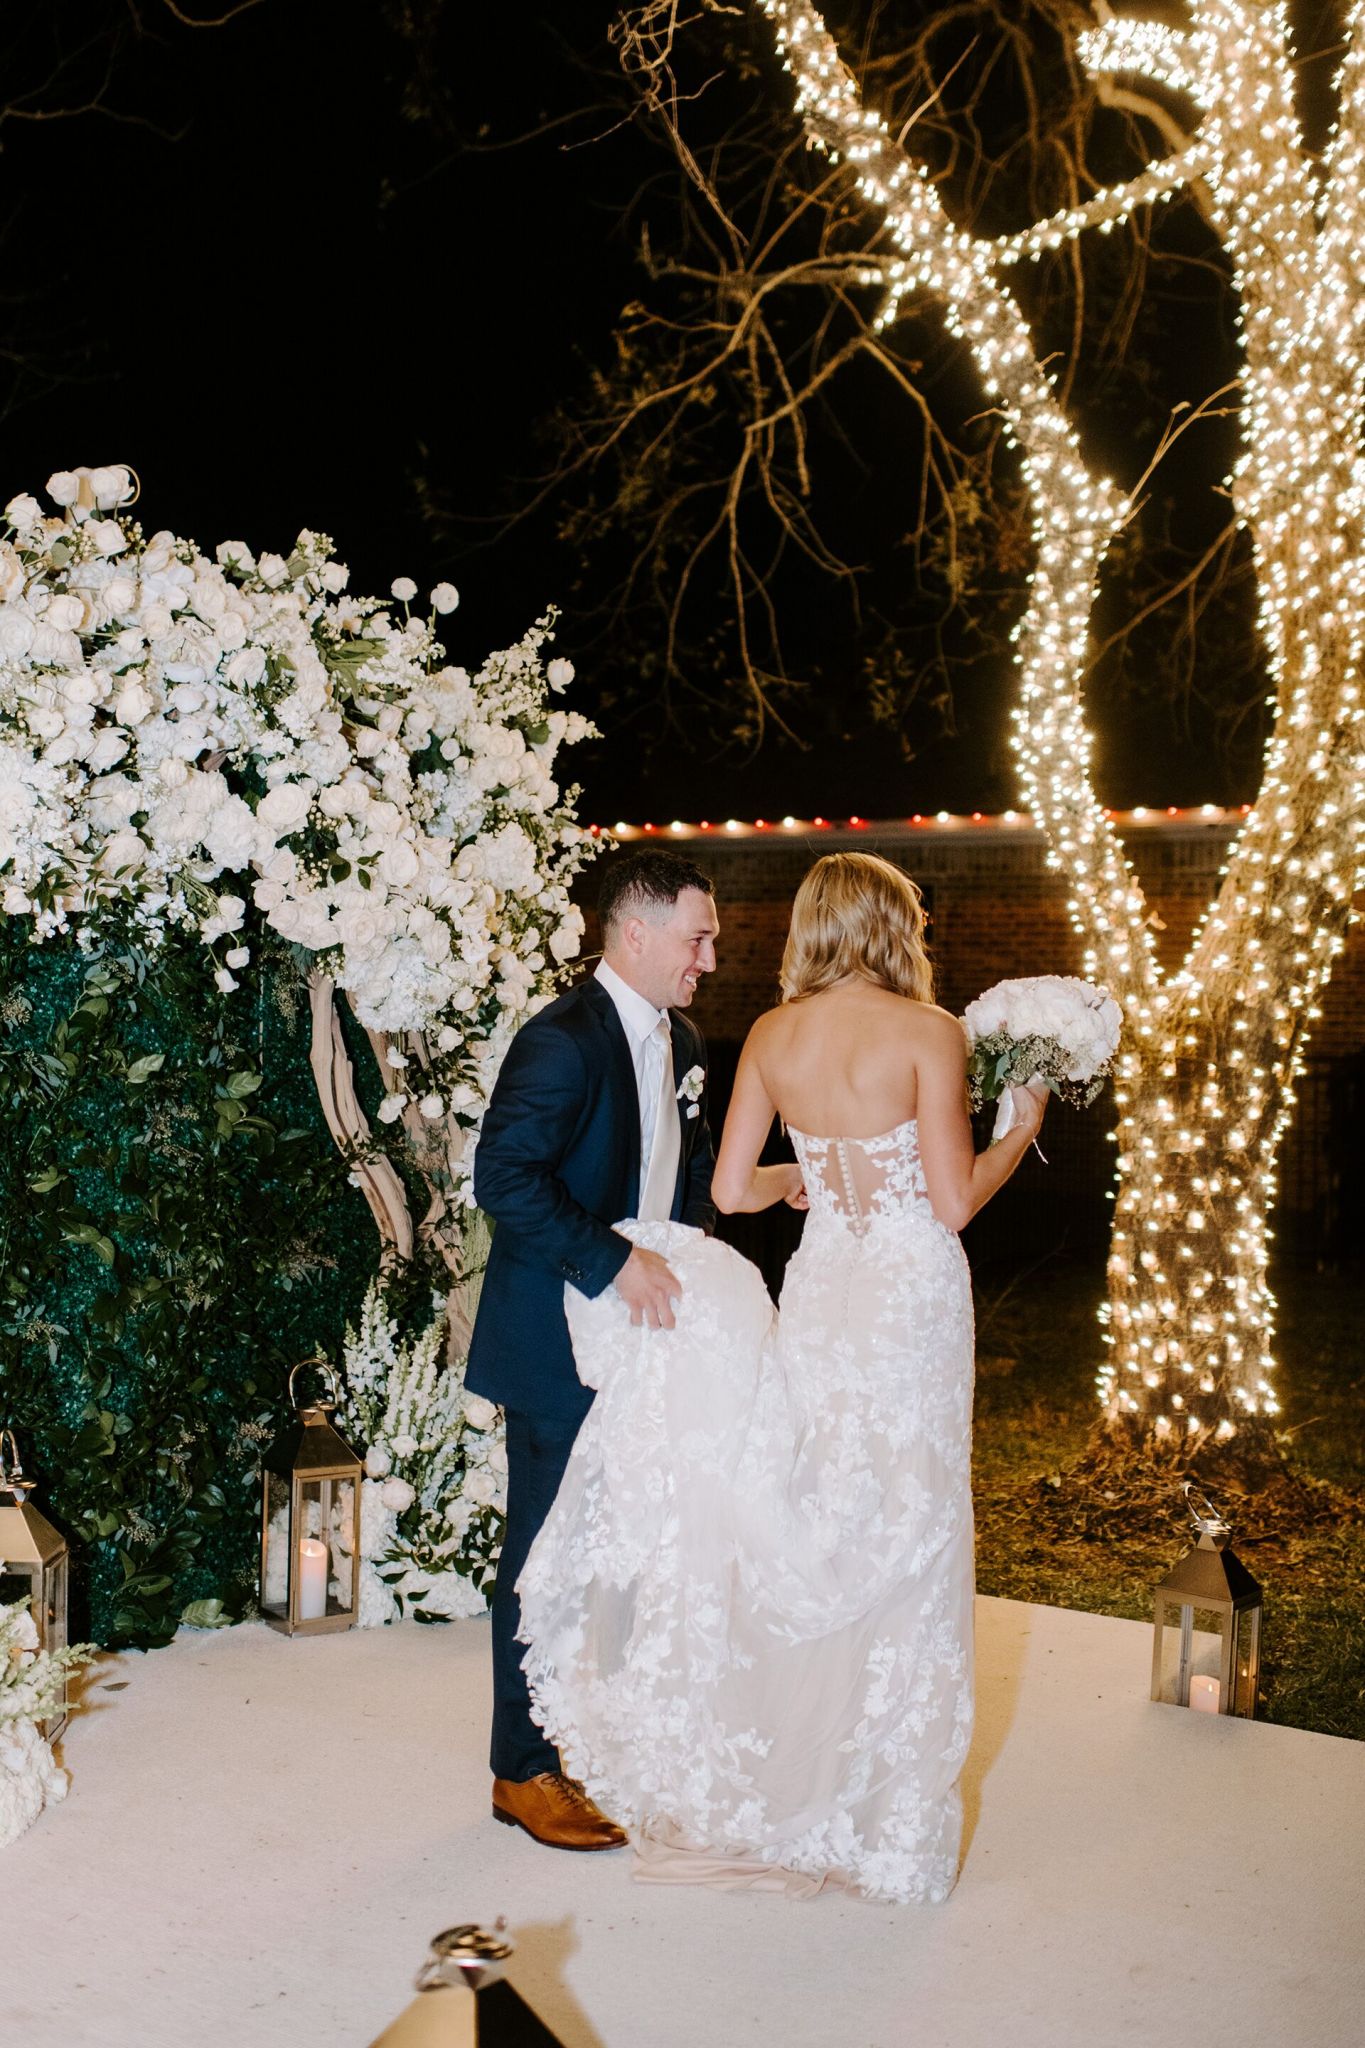 A Paul Wall performance, other details from Reagan and Alex Bregman's  wedding